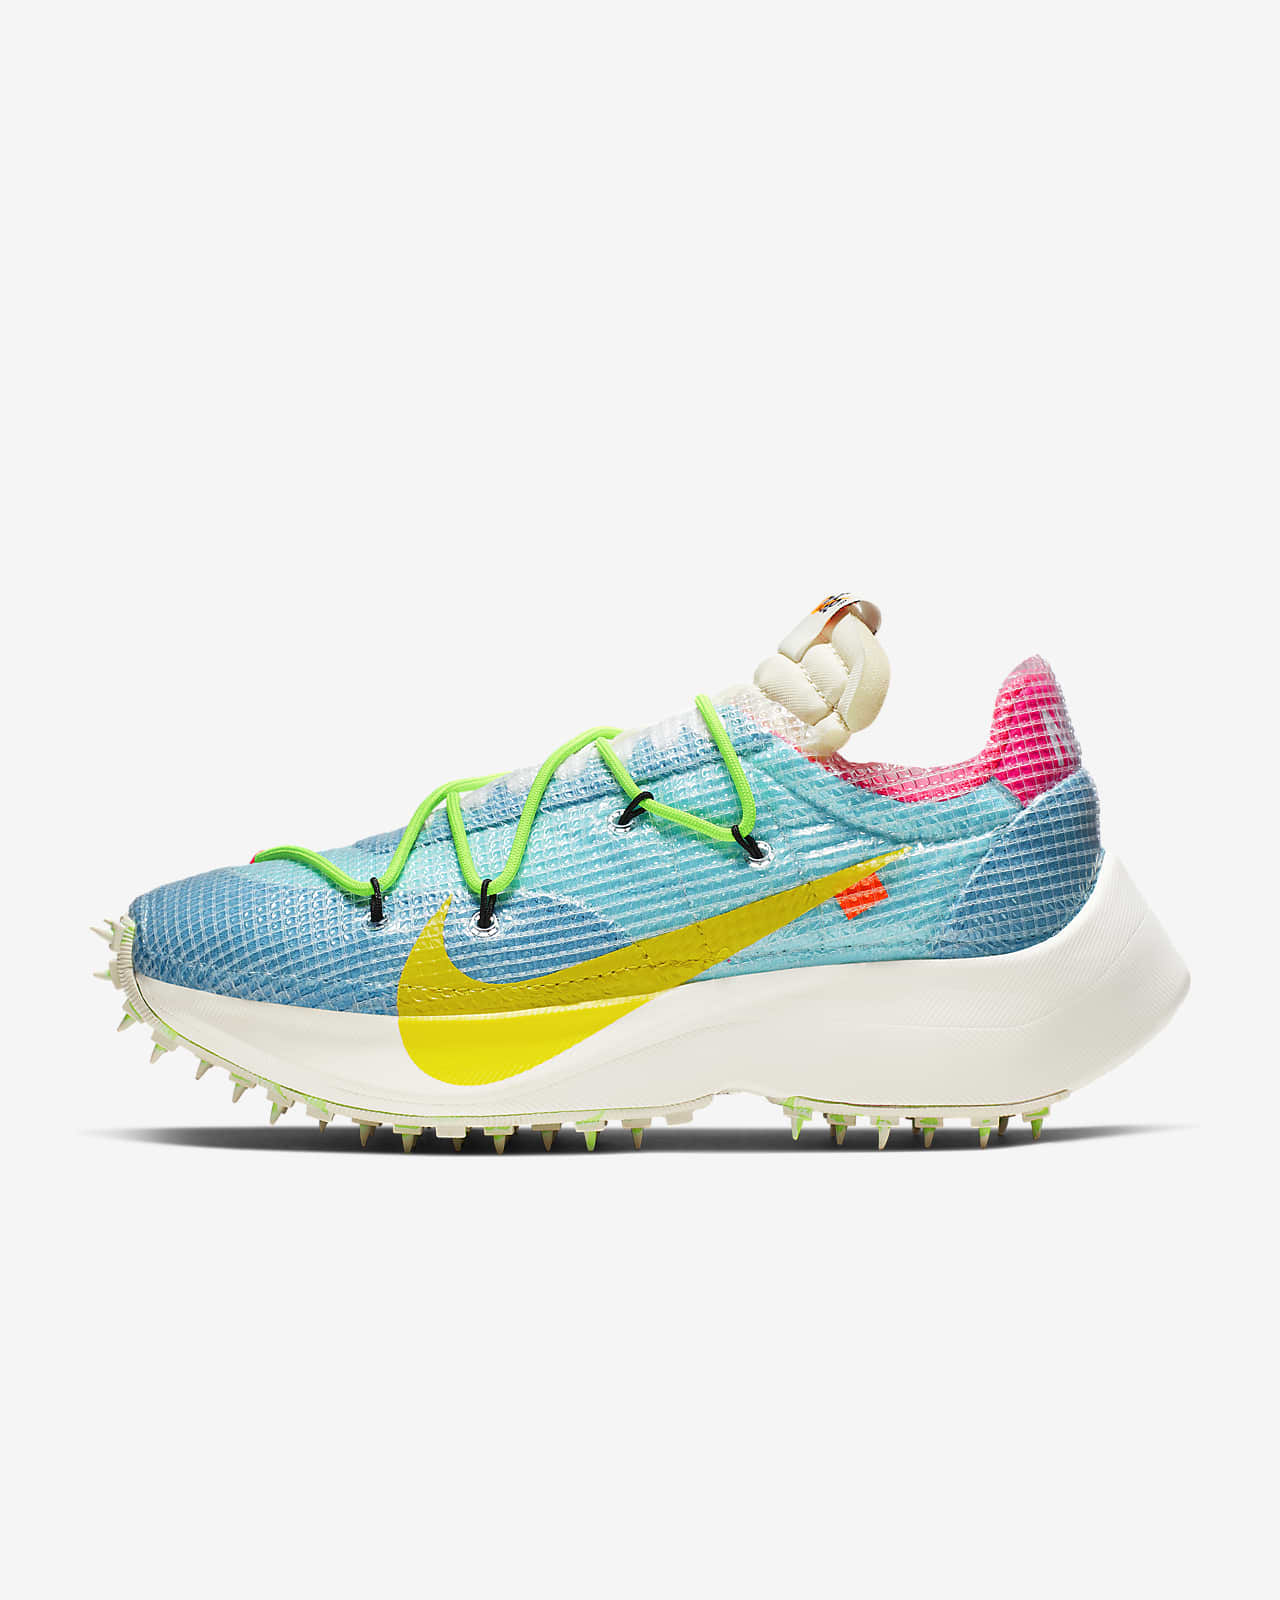 nike off white football shoes